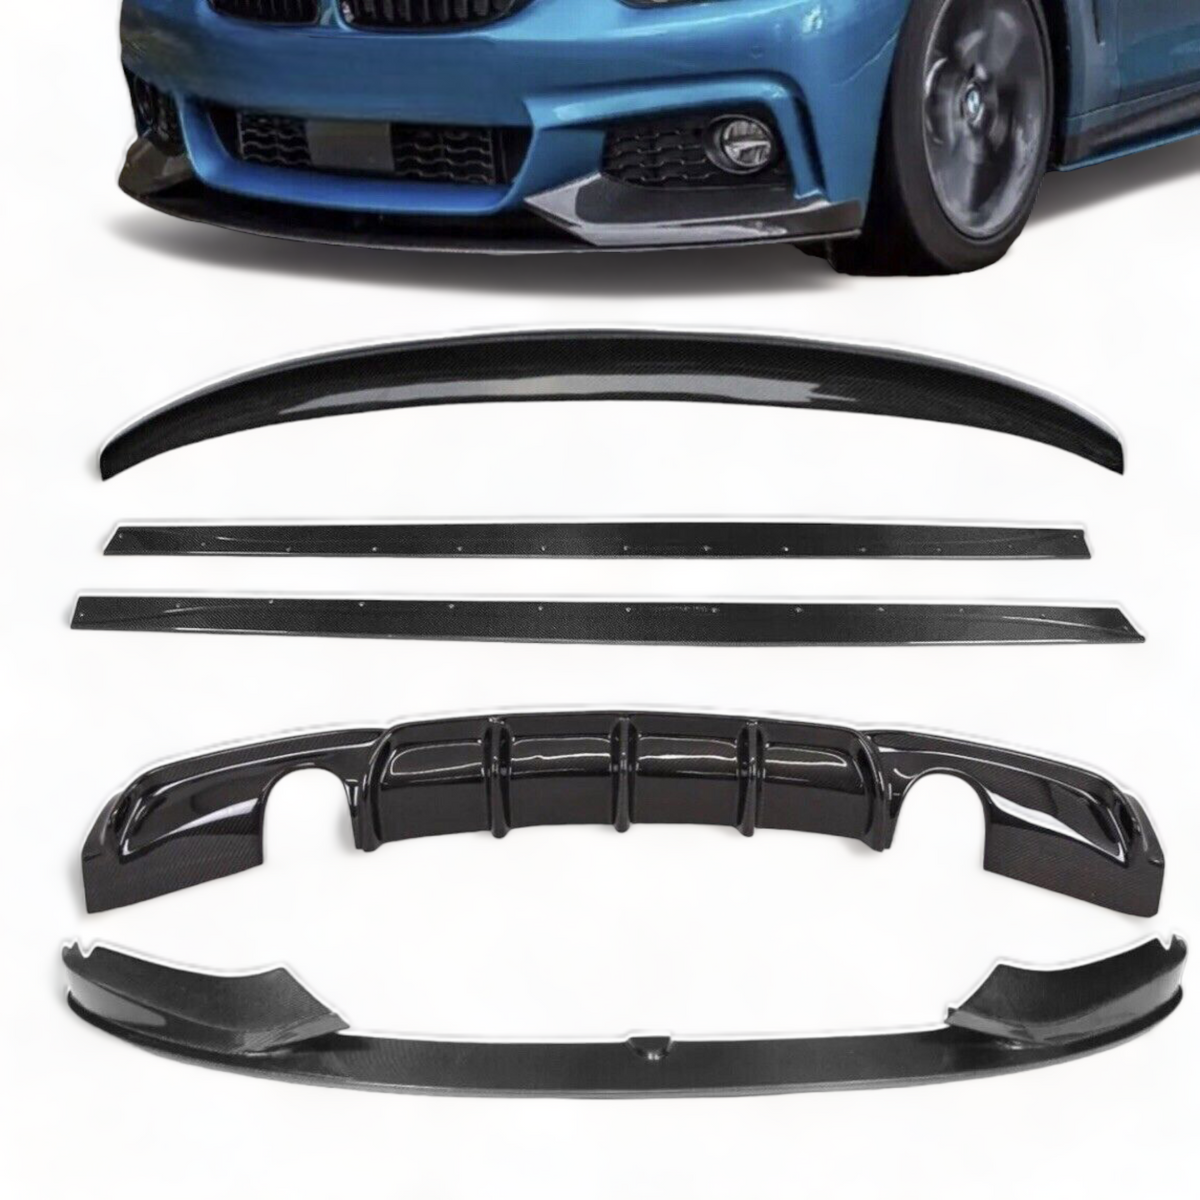 Full Body Kit - Fits BMW F33 Convertible 4 Series - Carbon Look